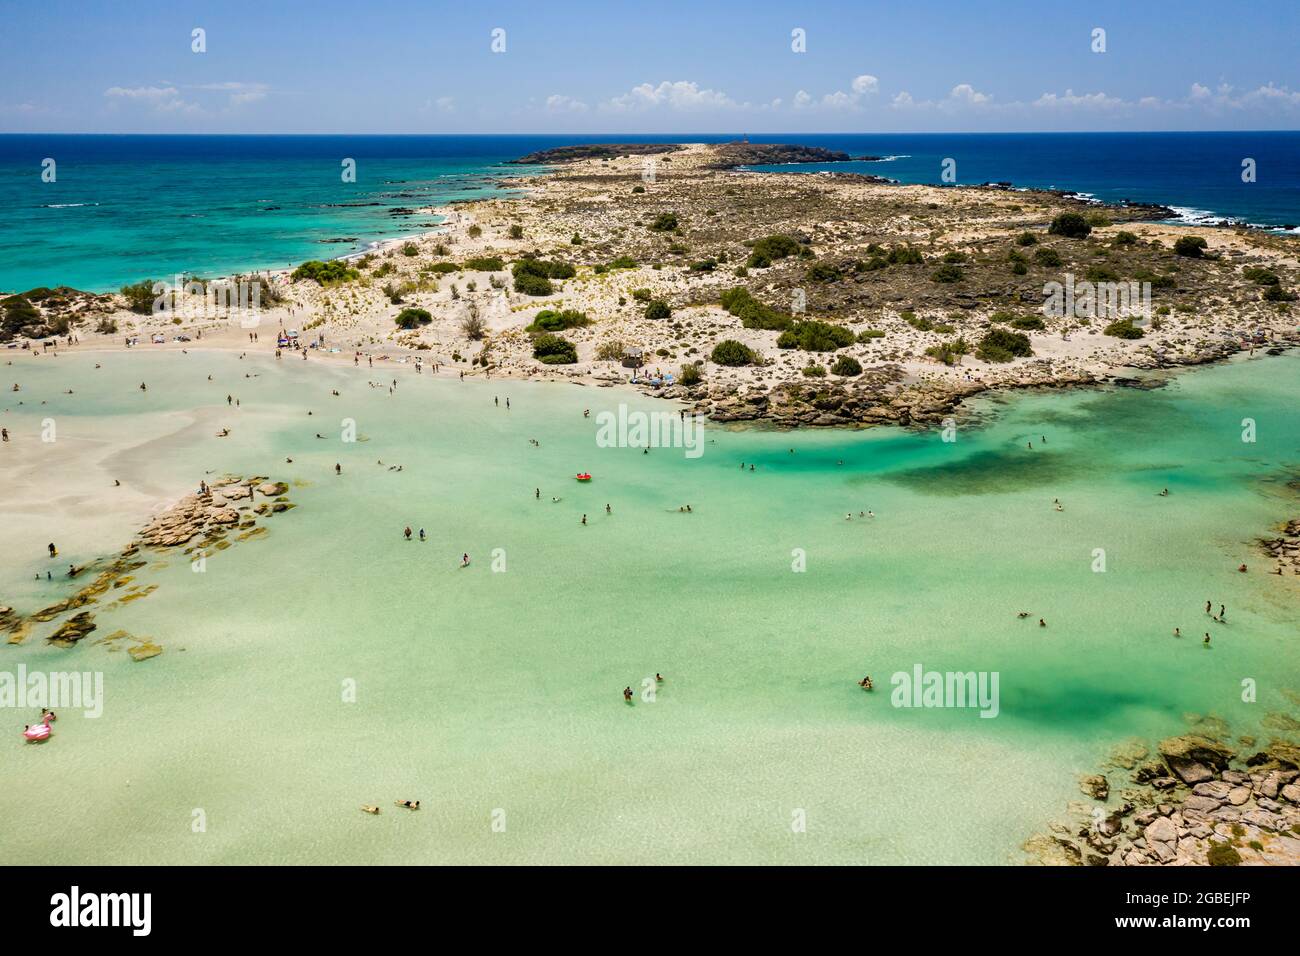 Aerial view of shallow sandy lagoons and a beach surrounded by deeper dark blue sea (Elafonissi Beach) Stock Photo